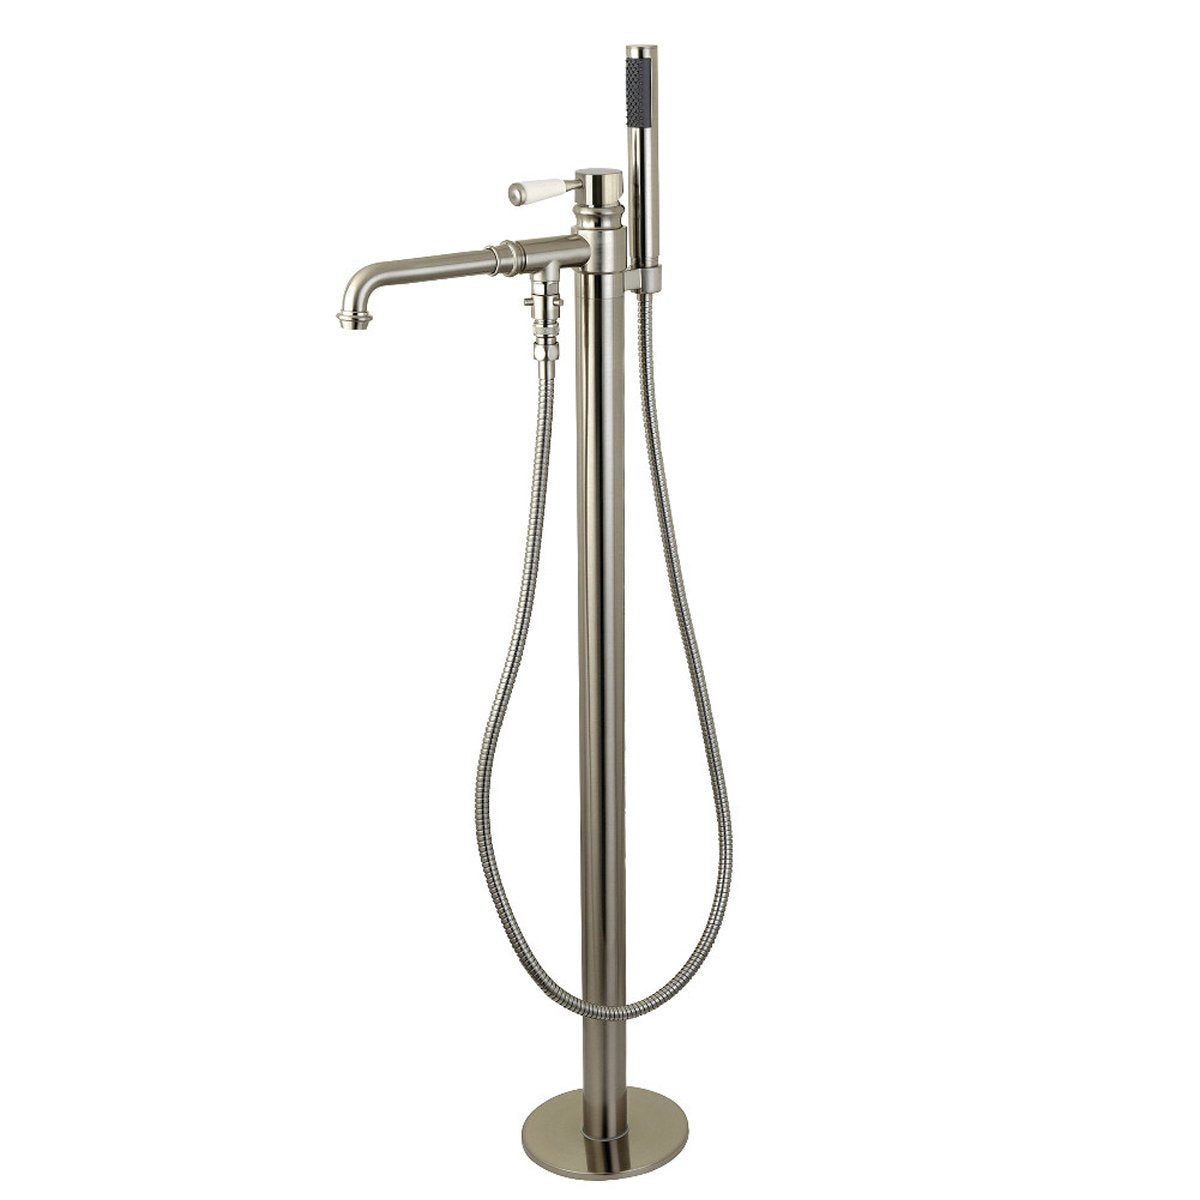 Kingston Brass Paris Single Handle Freestanding Tub Faucet with Hand Shower